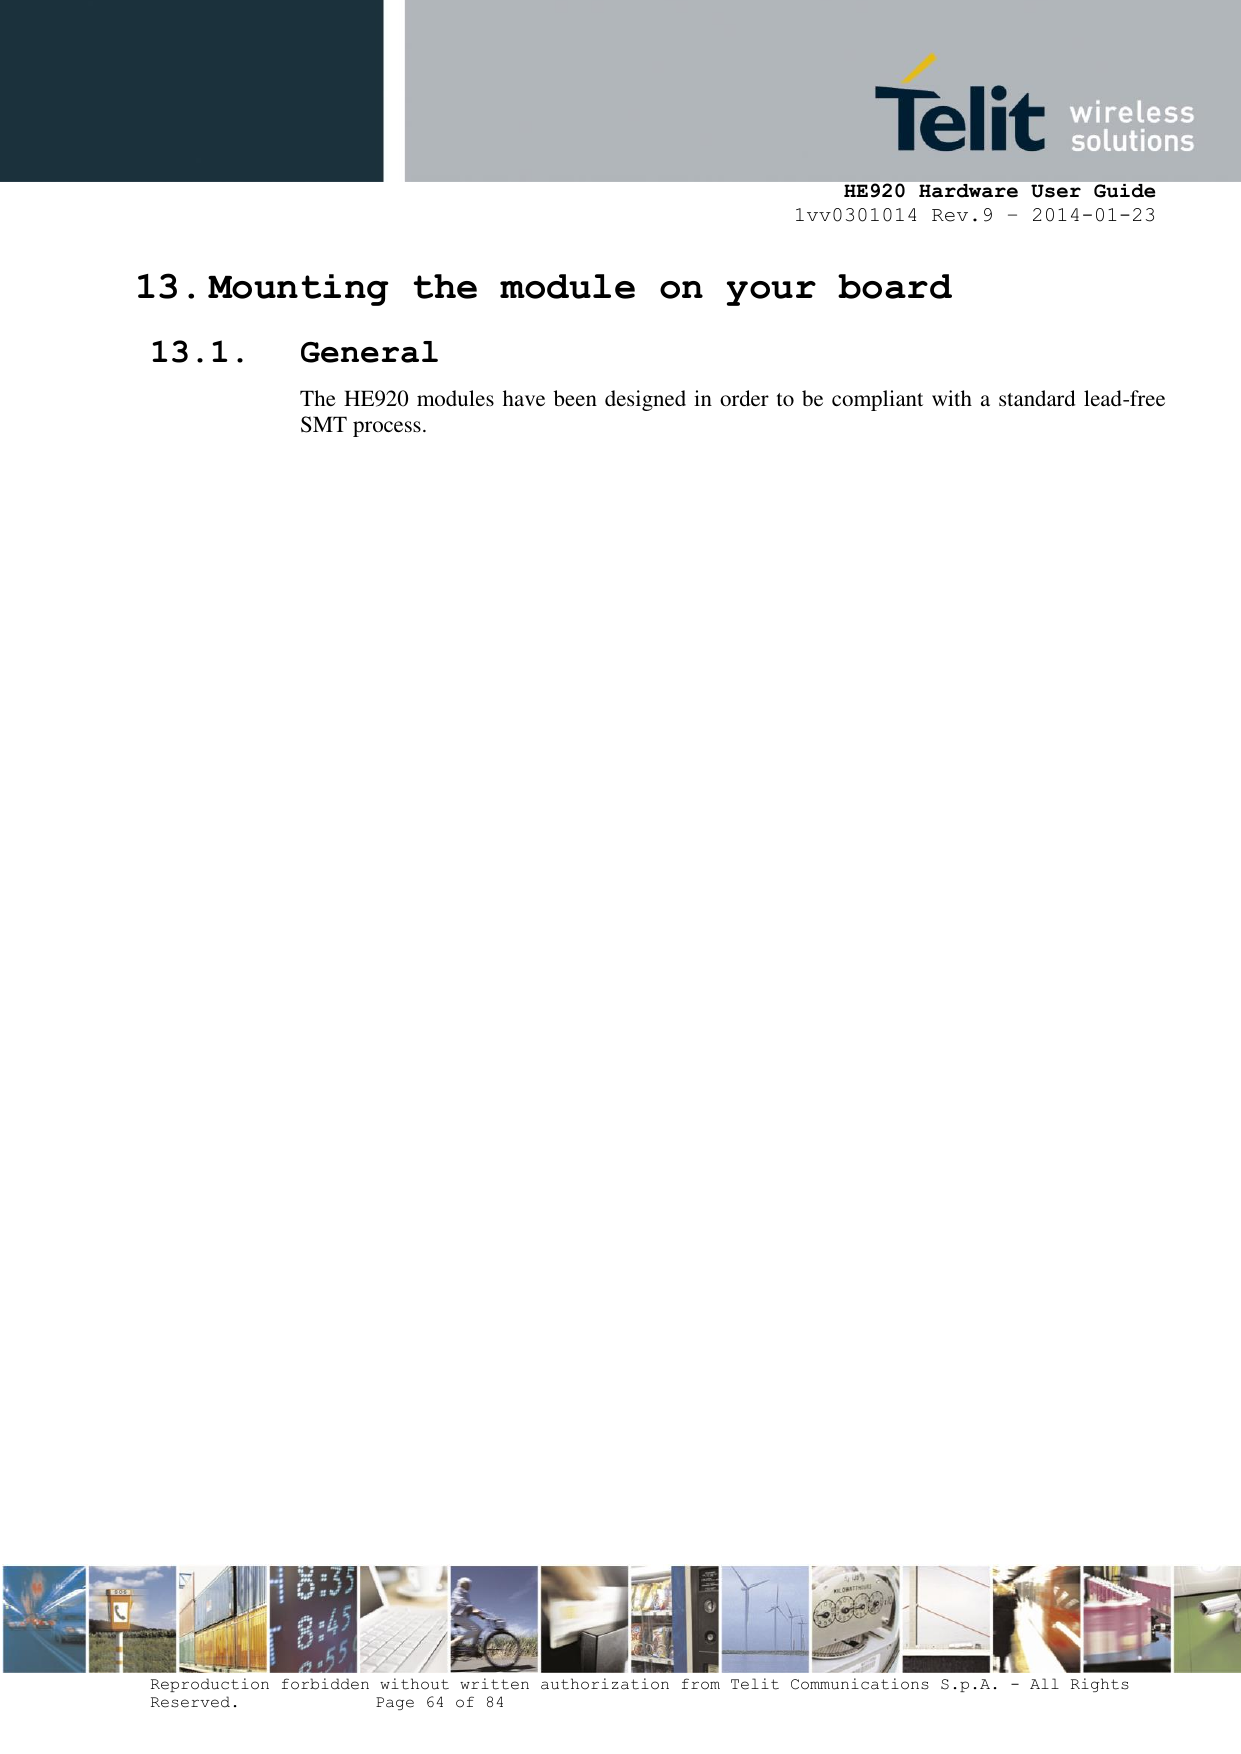     HE920 Hardware User Guide 1vv0301014 Rev.9 – 2014-01-23 Reproduction forbidden without written authorization from Telit Communications S.p.A. - All Rights Reserved.    Page 64 of 84  13. Mounting the module on your board 13.1. General The HE920 modules have been designed in order to be compliant with a standard lead-free SMT process.  